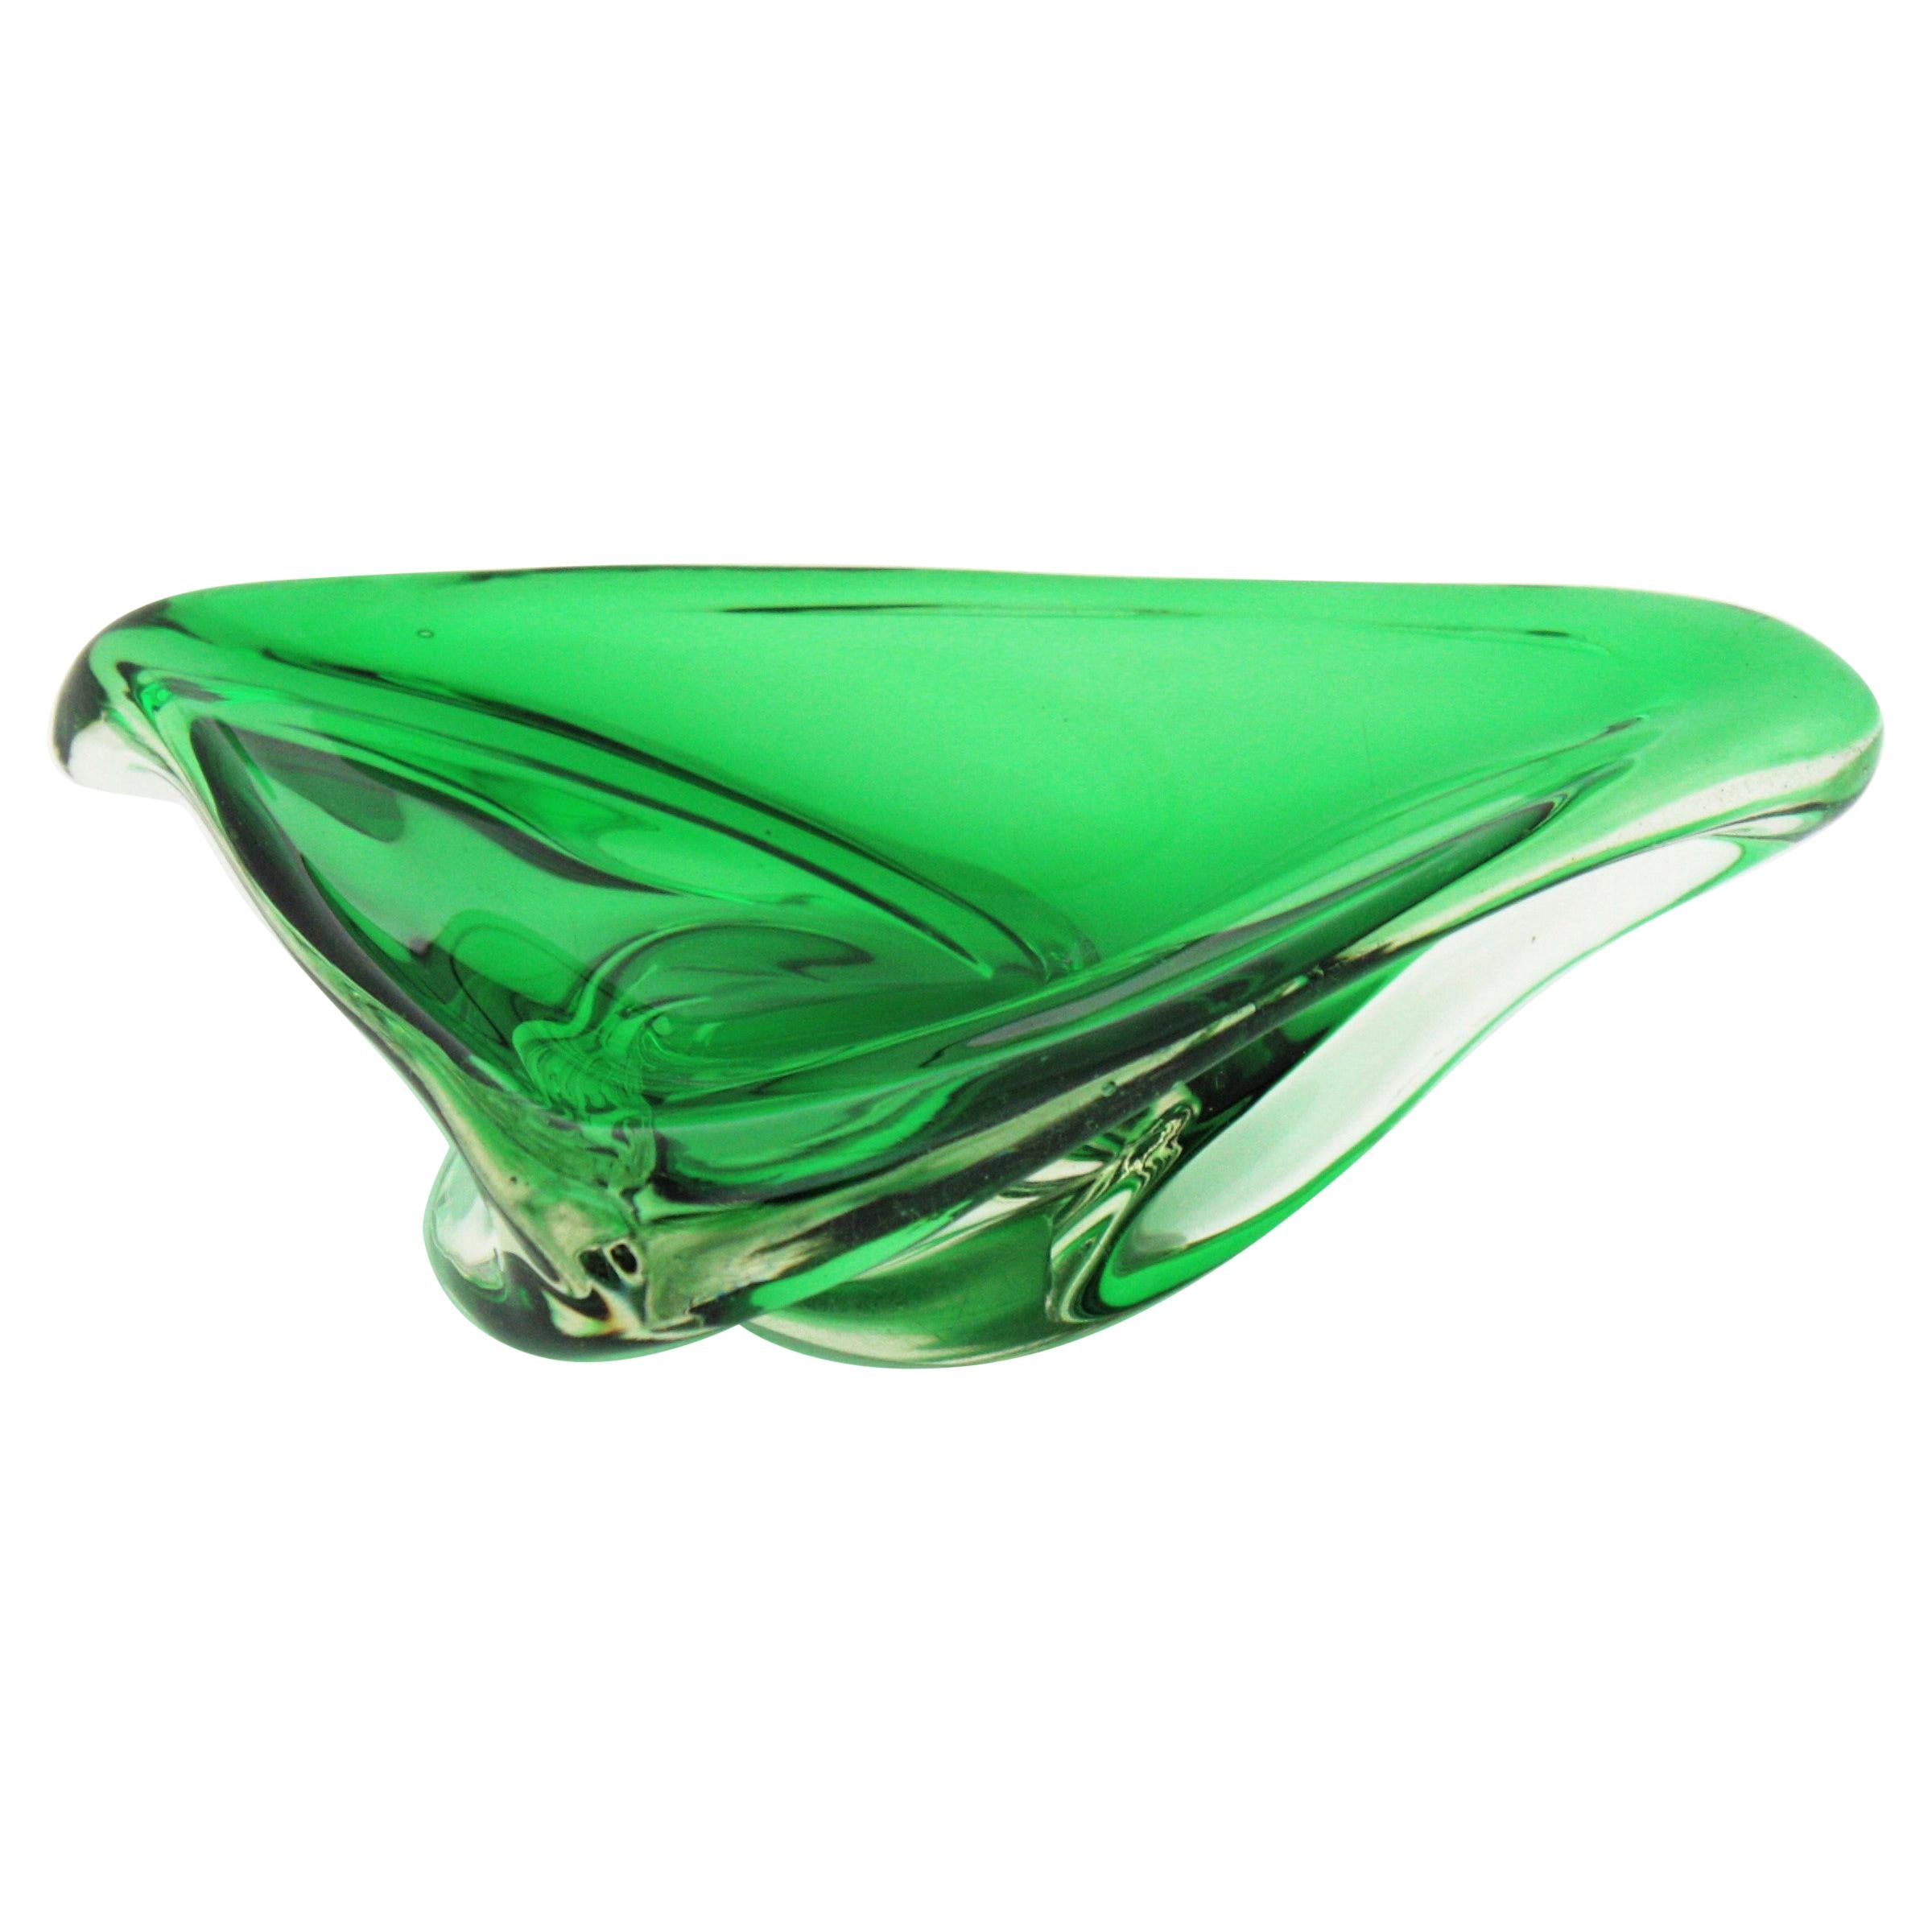 A beautiful handblown Murano glass bowl in emerald green color cased into clear glass. Attributed to Seguso factory. Italy, 1960s.
It has a central swirl decoration and triangular shape.
Useful as candy or jewelry bowl, ashtray or vide